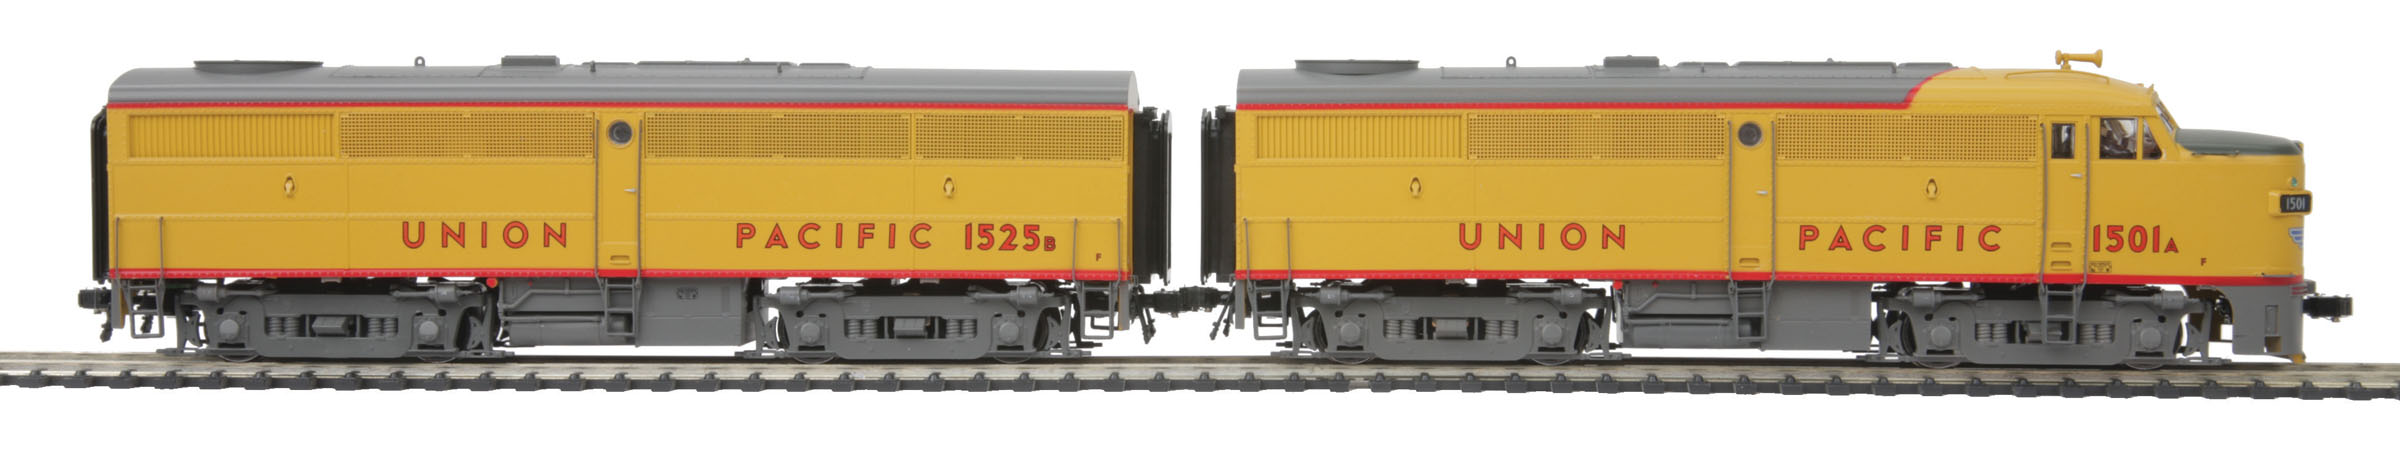 Trains At 410 381 And Connecting To The Sales Department | cmsfc.com